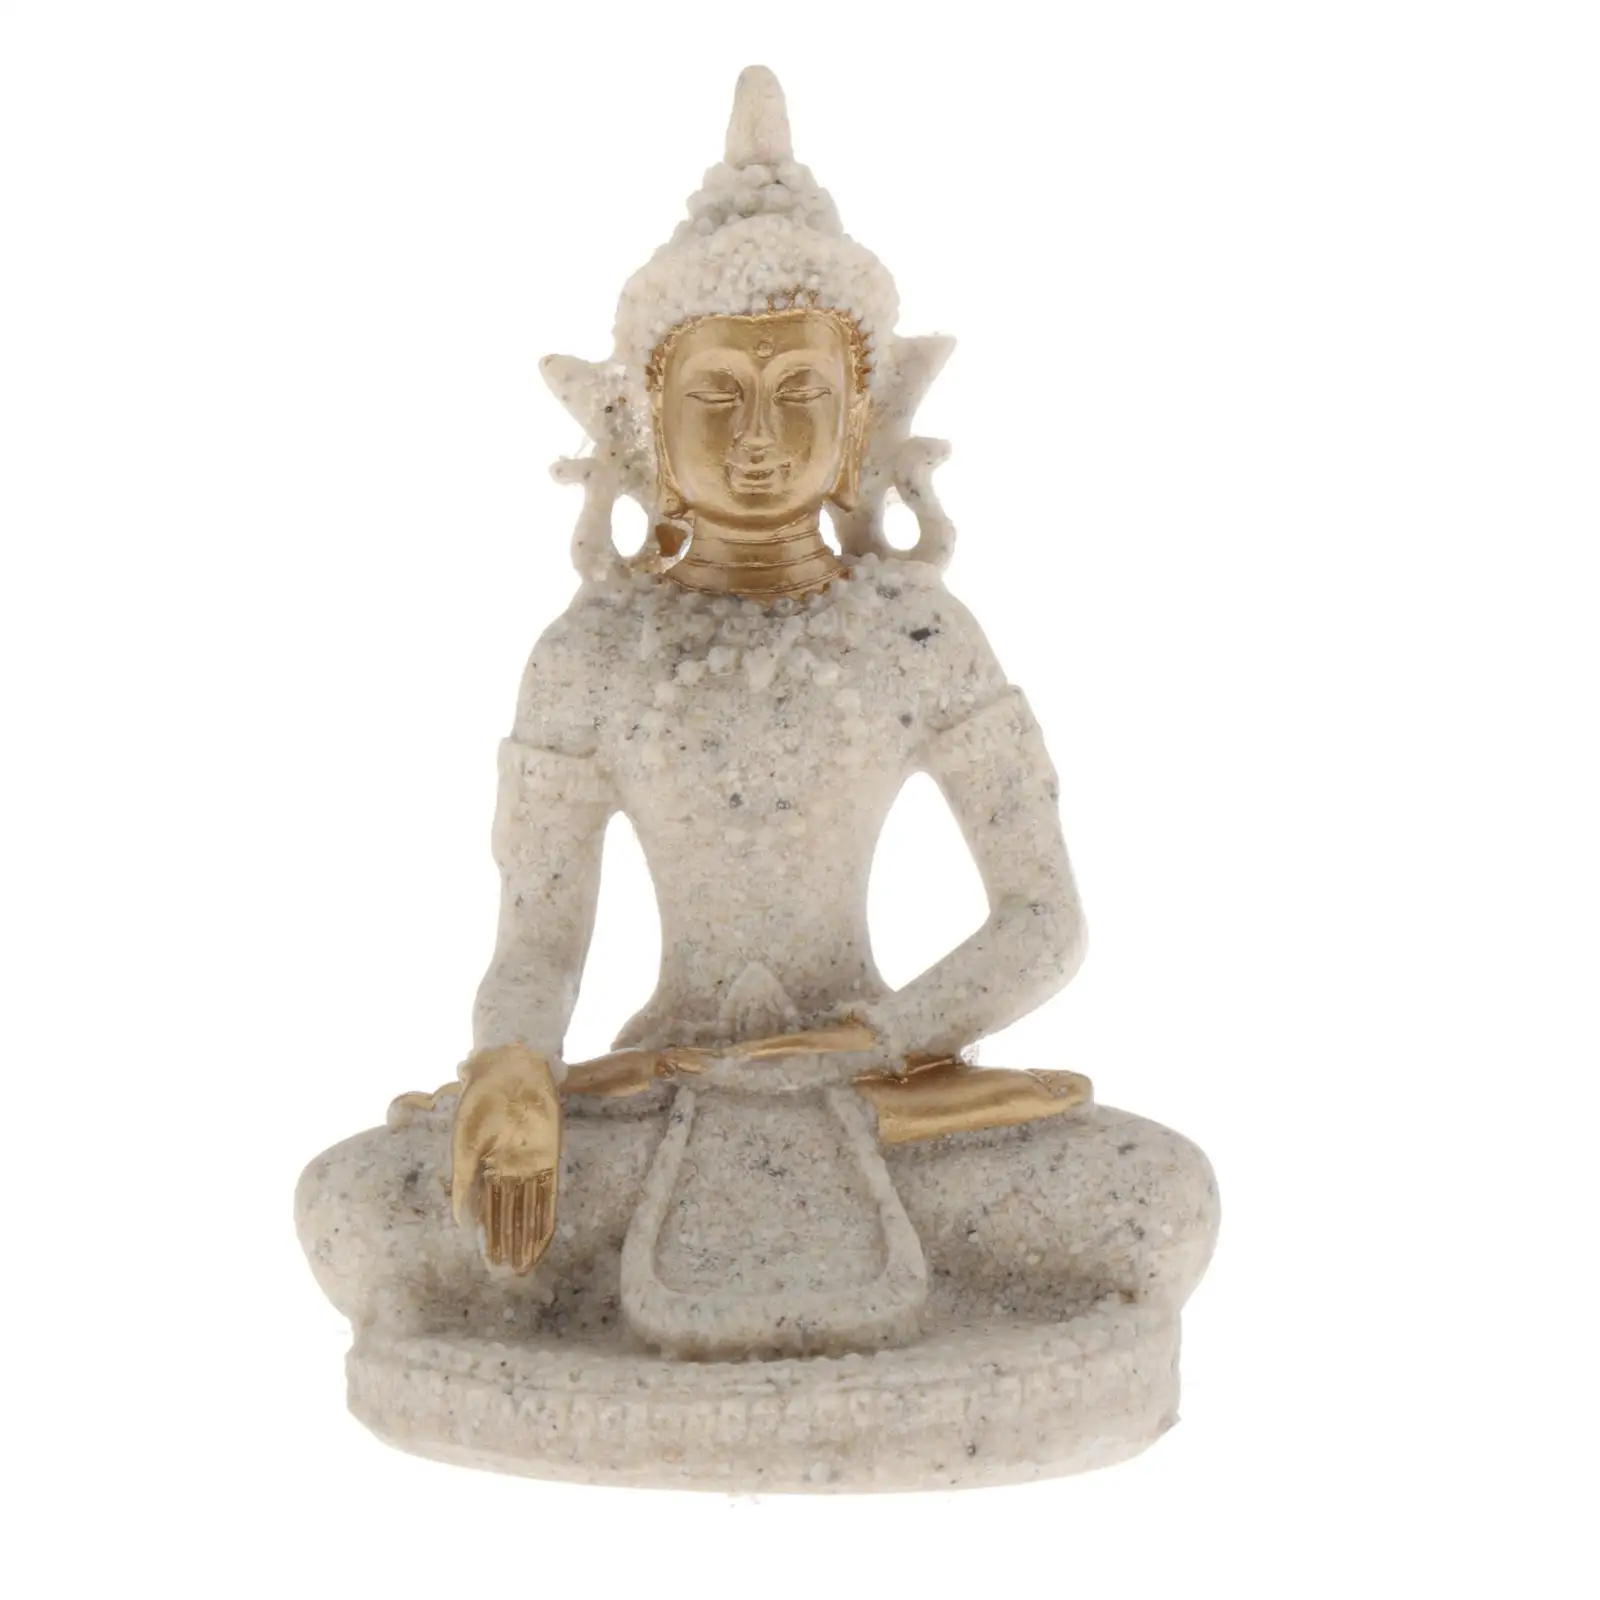 Buddha Statue in Meditation Pose for Home Decor - Made with Natural Stone and